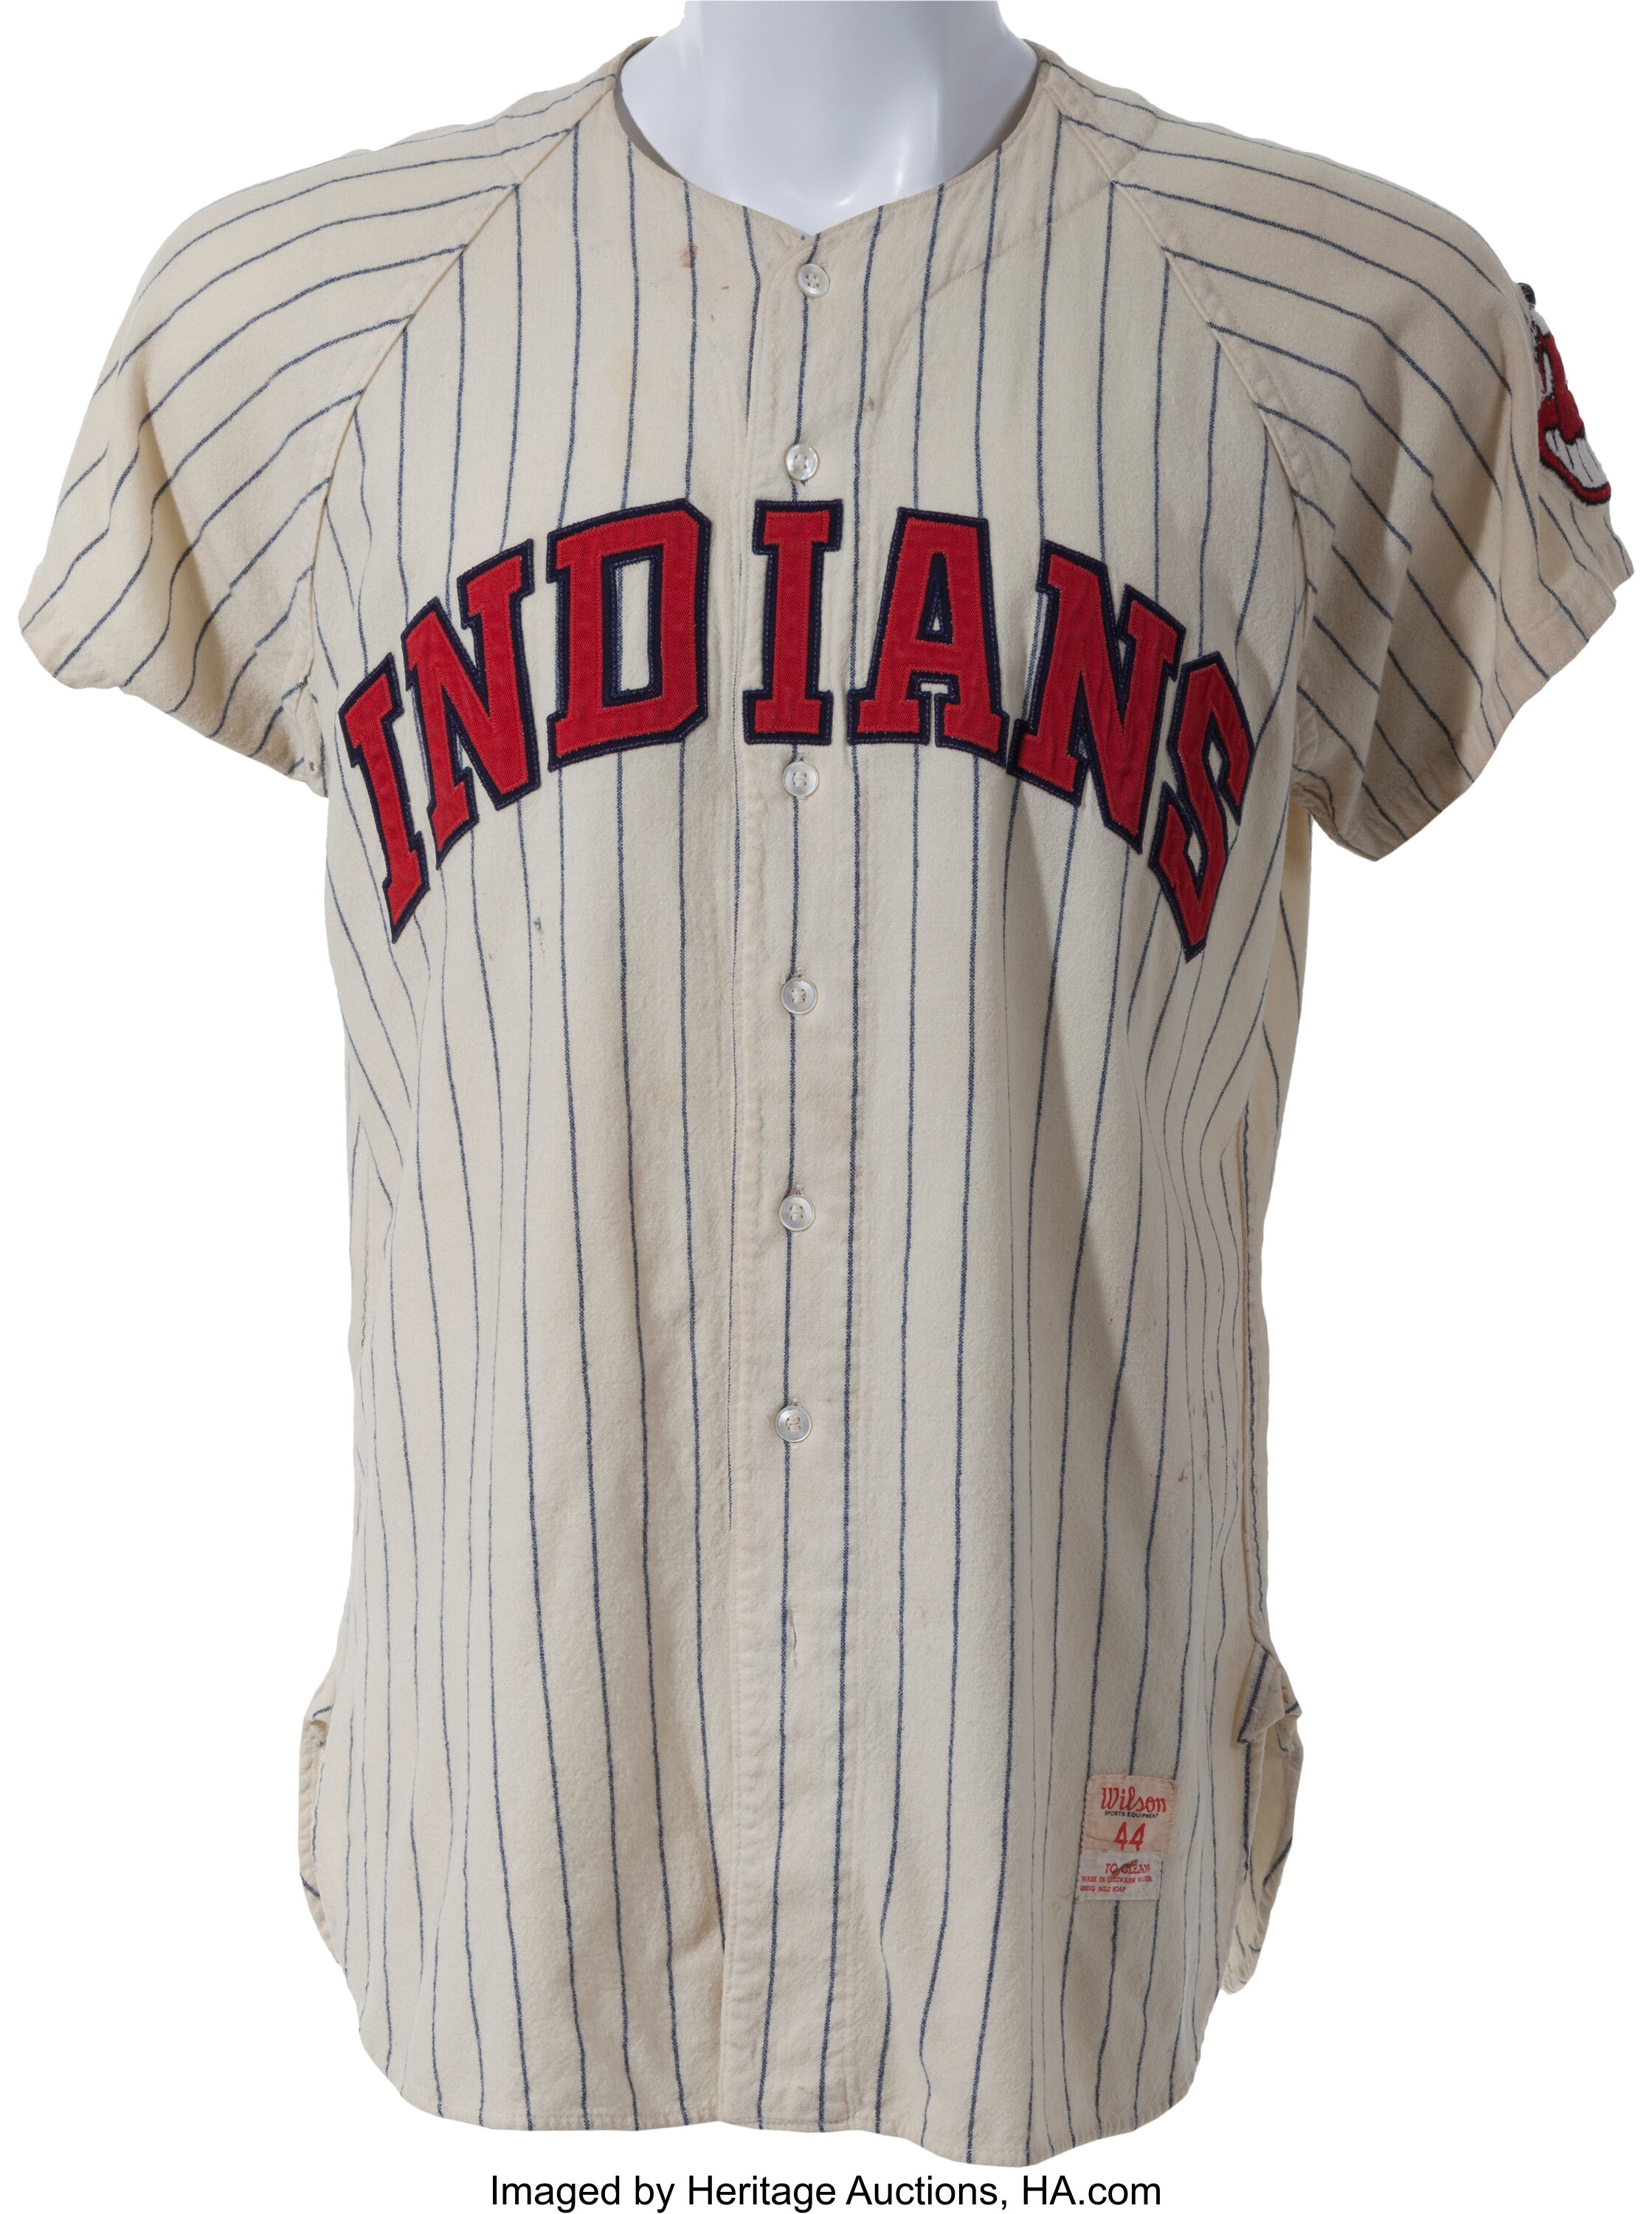 Phase 1 of new project completed cleveland indians jersey deep cleaned :  r/baseballunis